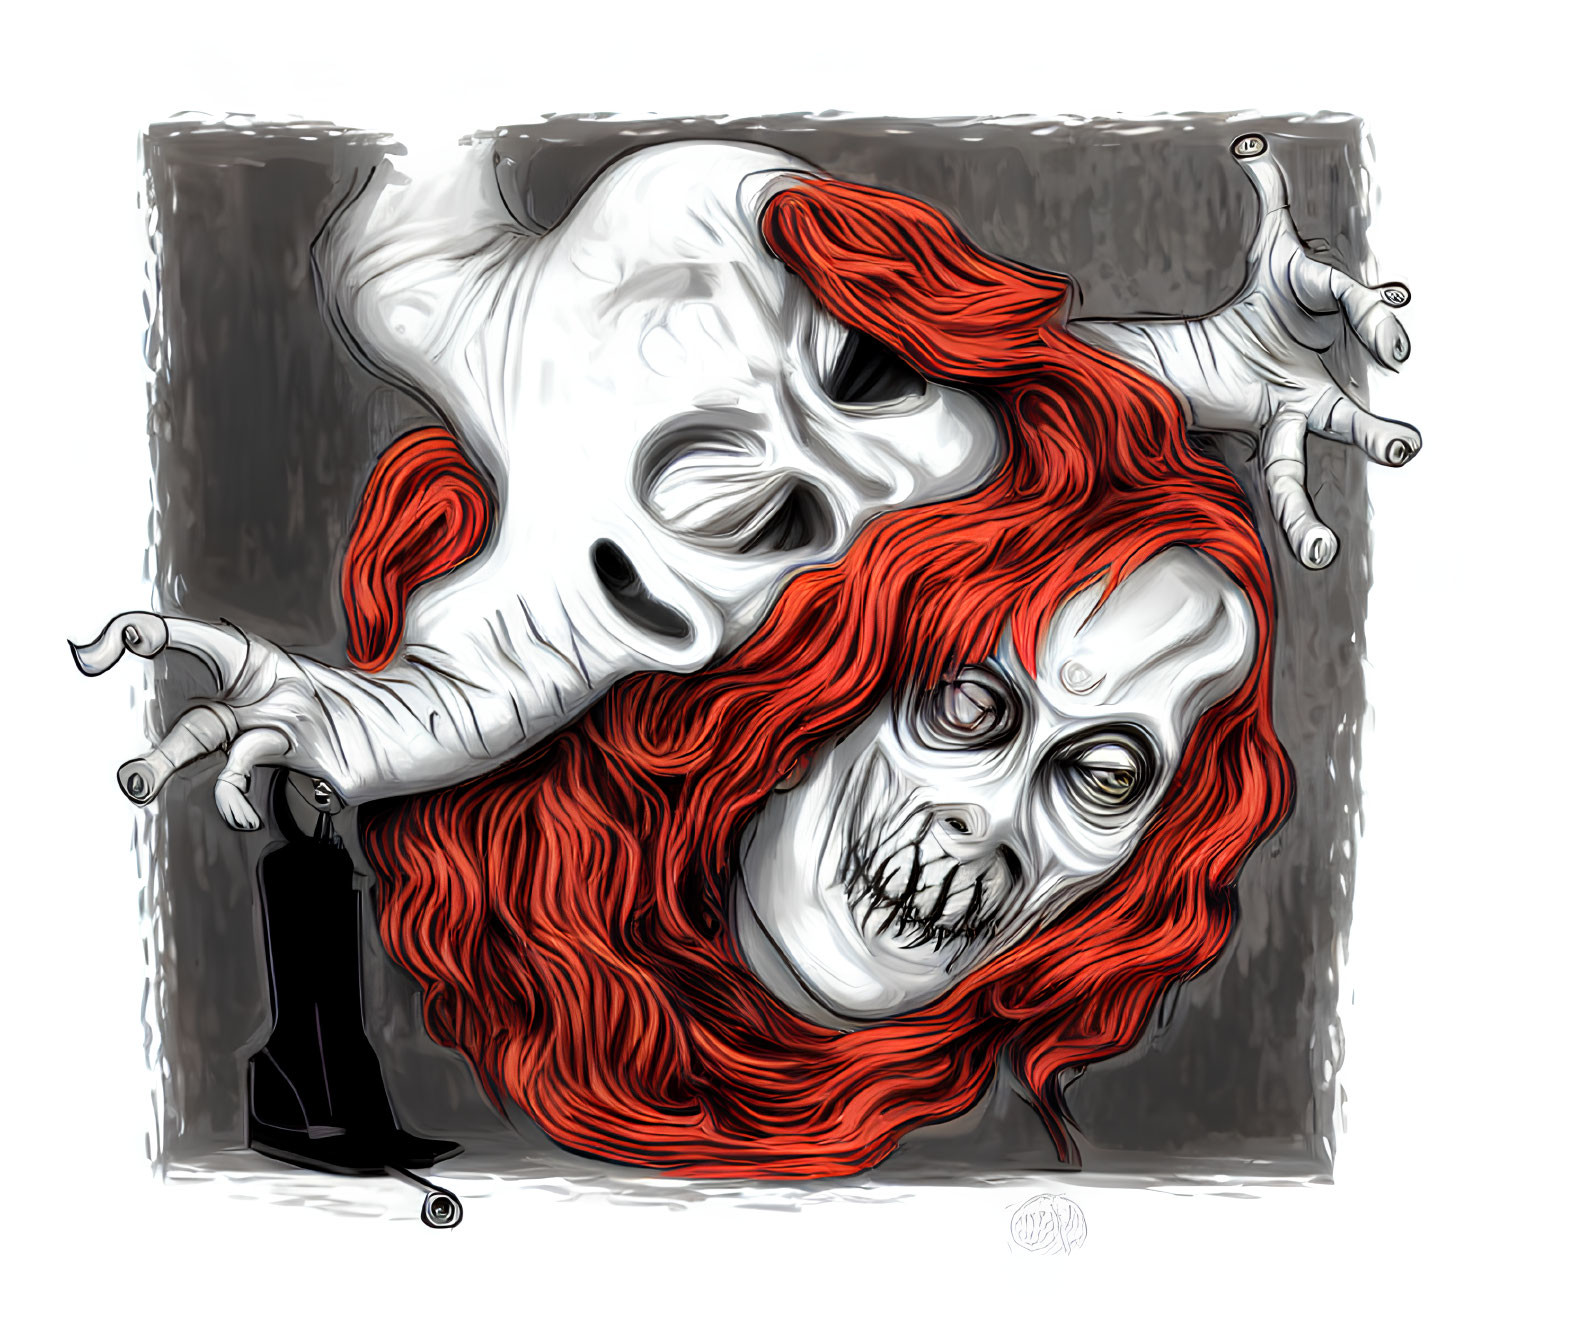 Grayscale illustration with red accent: Macabre figure with skull face, red hair, and claw